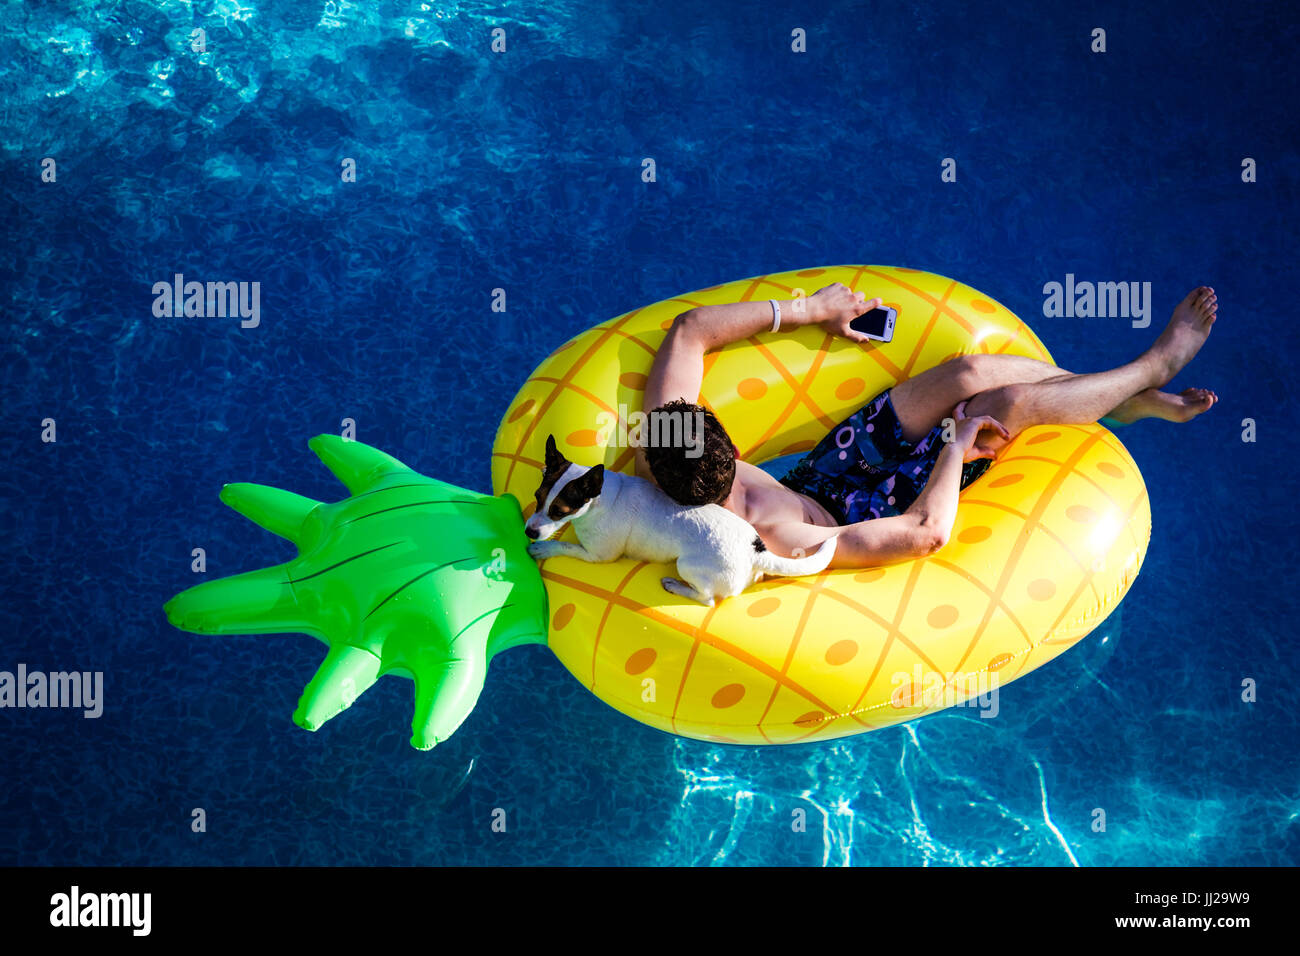 Teenage boy and Jack Russell Terrier dog relaxing while floating on a pineapple shaped pool toy in an outdoor swimming pool. Stock Photo